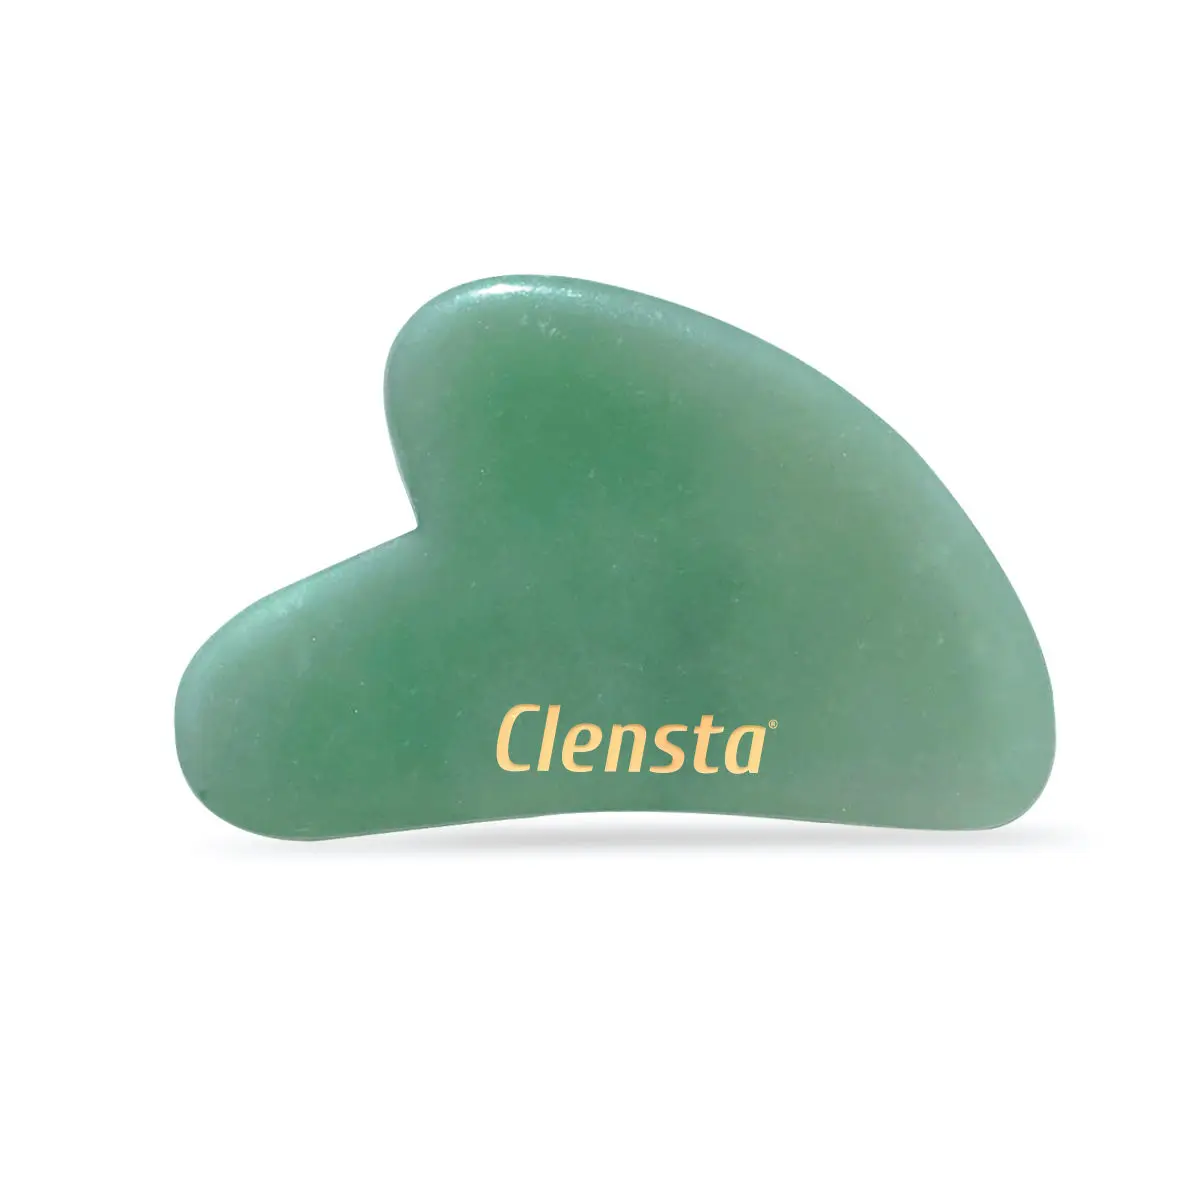 Clensta Gua Sha - Green Quartz Face Massaging Stone | For Skin Toning, Reducing Puffiness & Skin Elasticity | For Men & Women | Made with Aventurine | Loaded with Positive Energy & Vitality